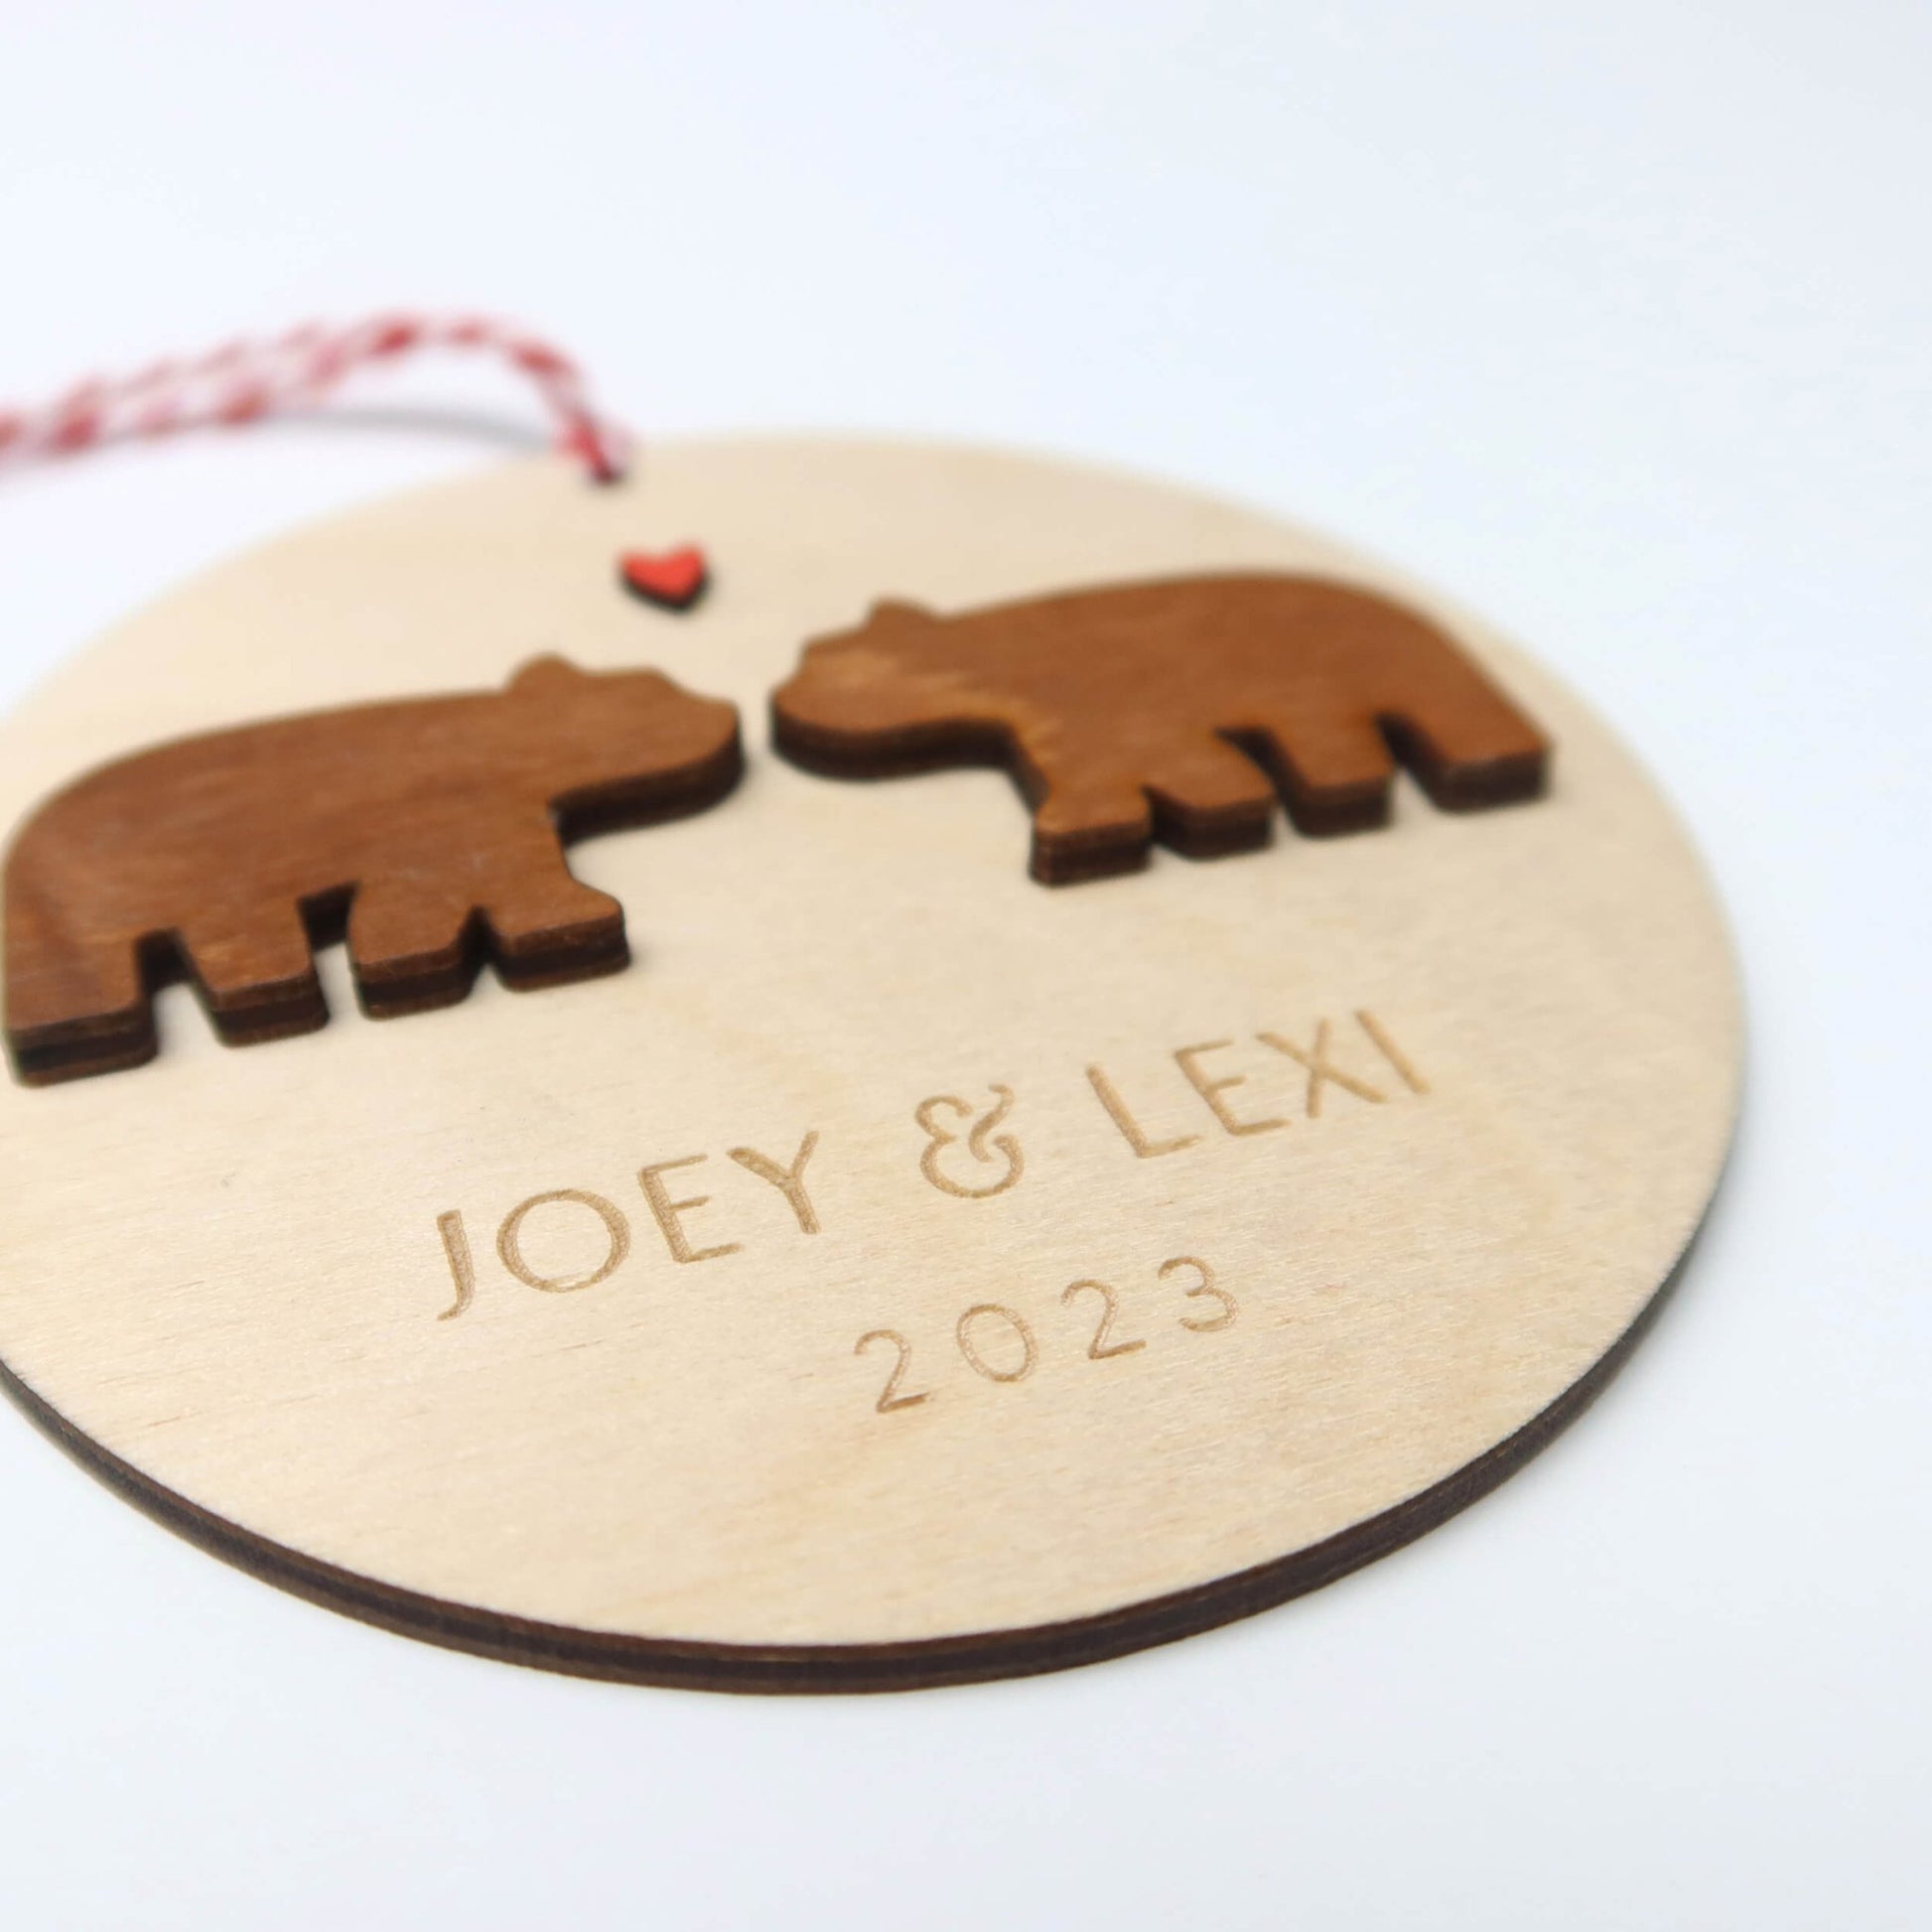 Bears Personalized Couple Christmas Ornament - Holiday Ornaments - Moon Rock Prints